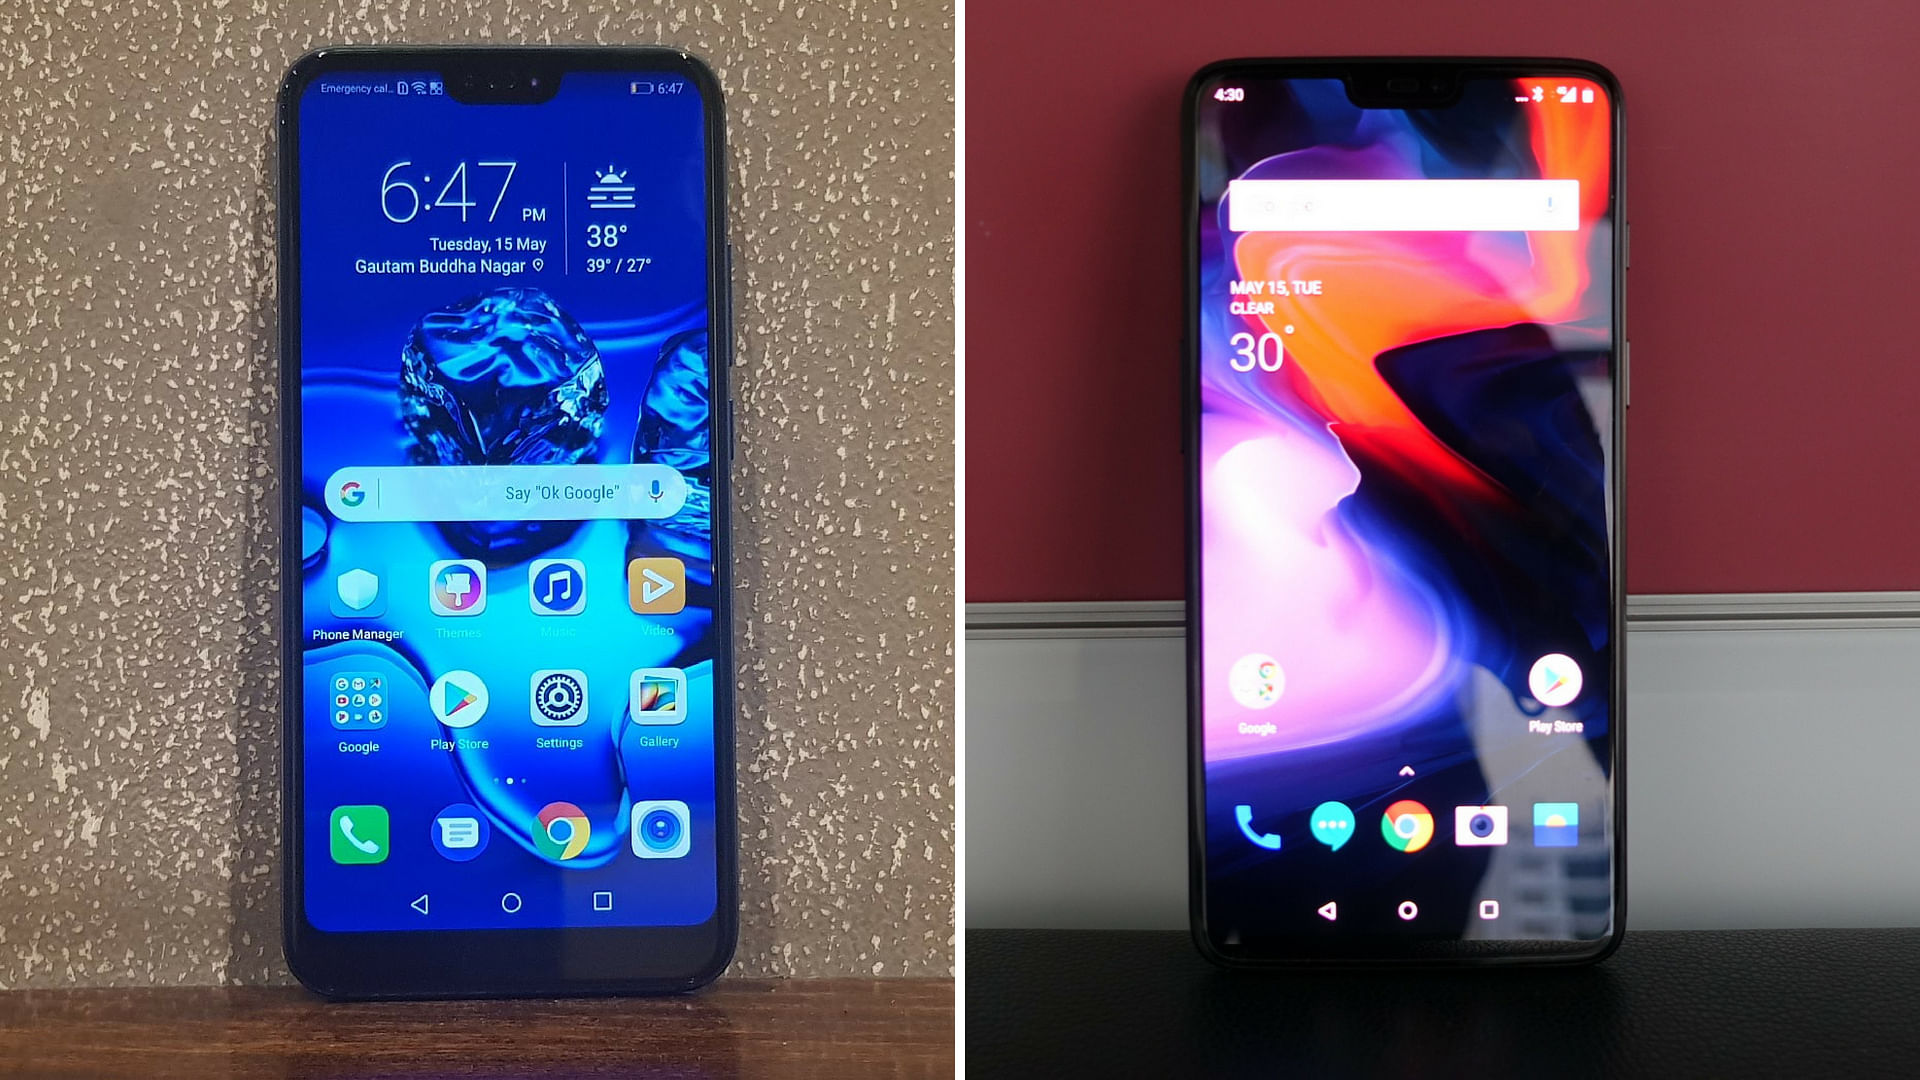 Honor 10 (left) against the OnePlus 6 (right).